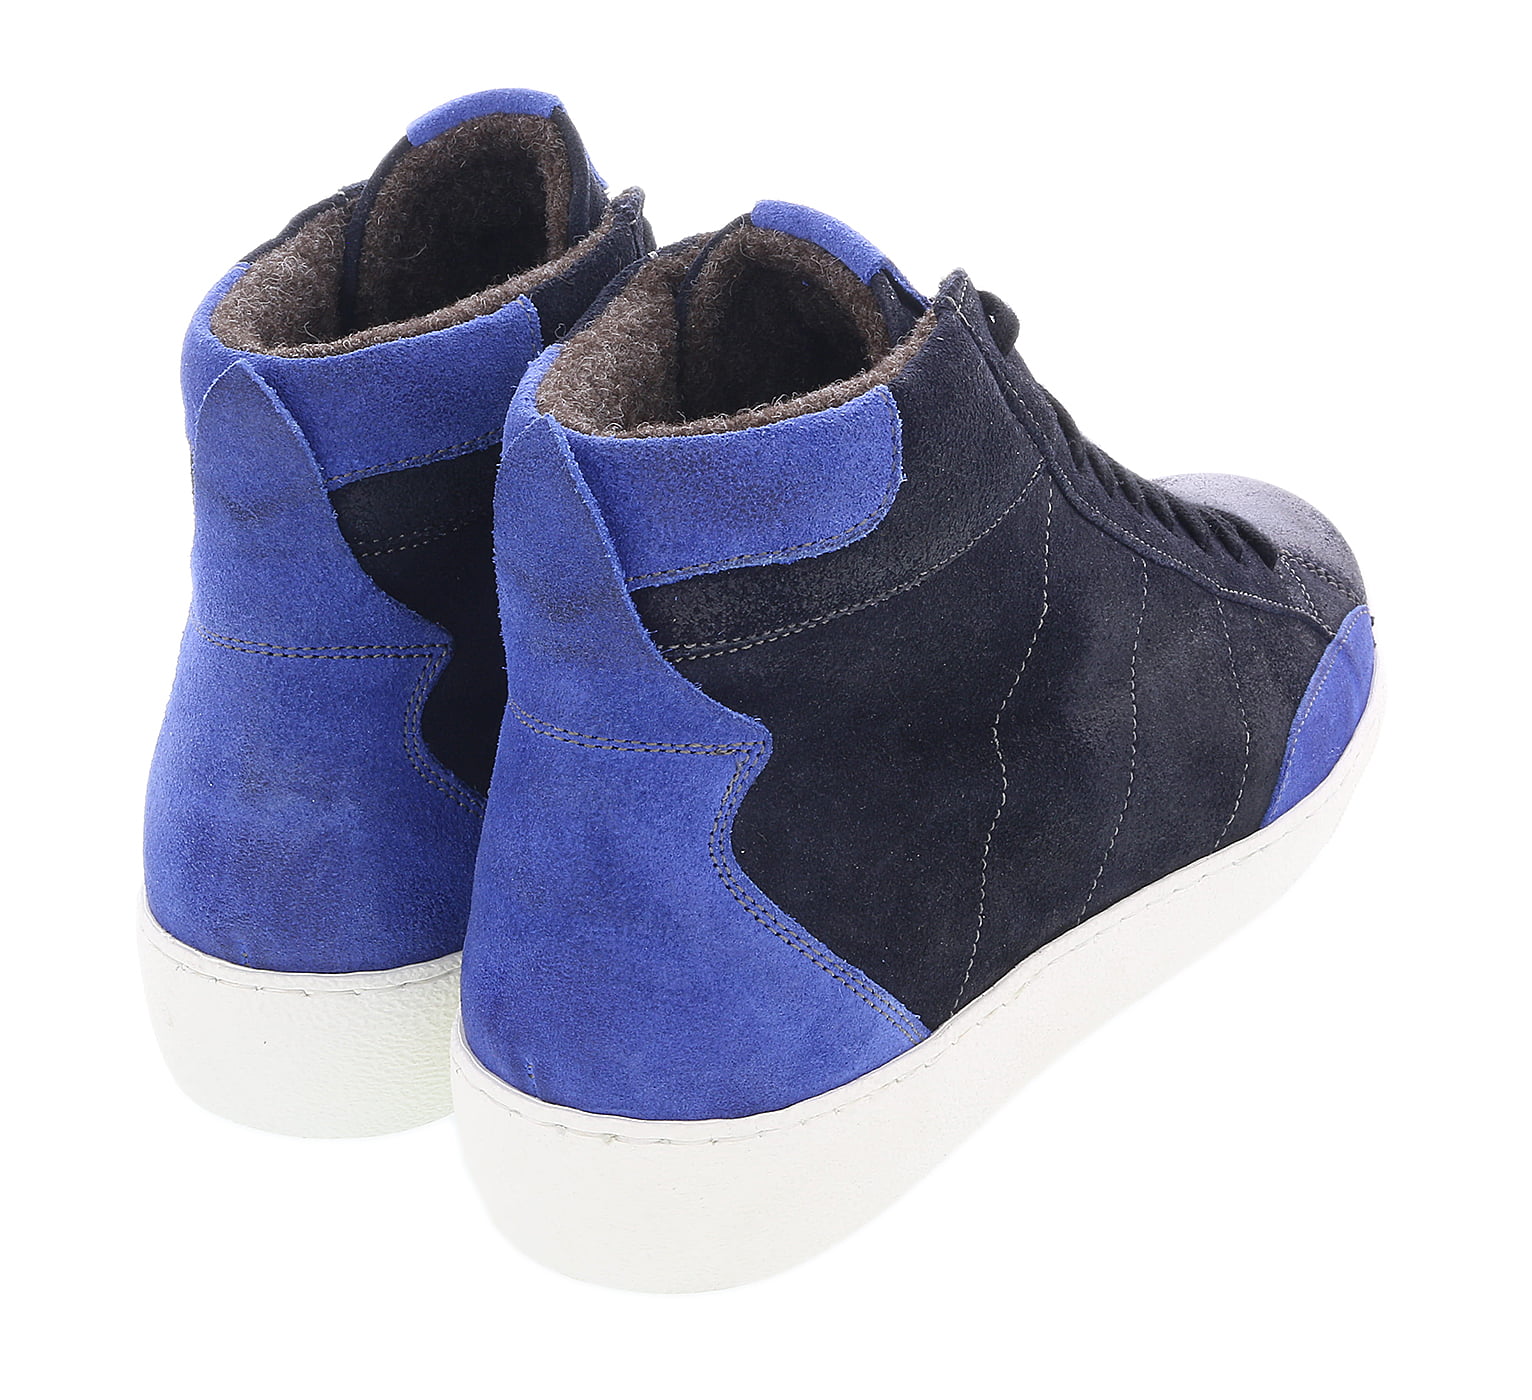 New Balance 520 Womens Size 5 B Shoes Suede Sneakers Running WL520CLC Blue  | Suede shoes, Suede sneakers, Shoes